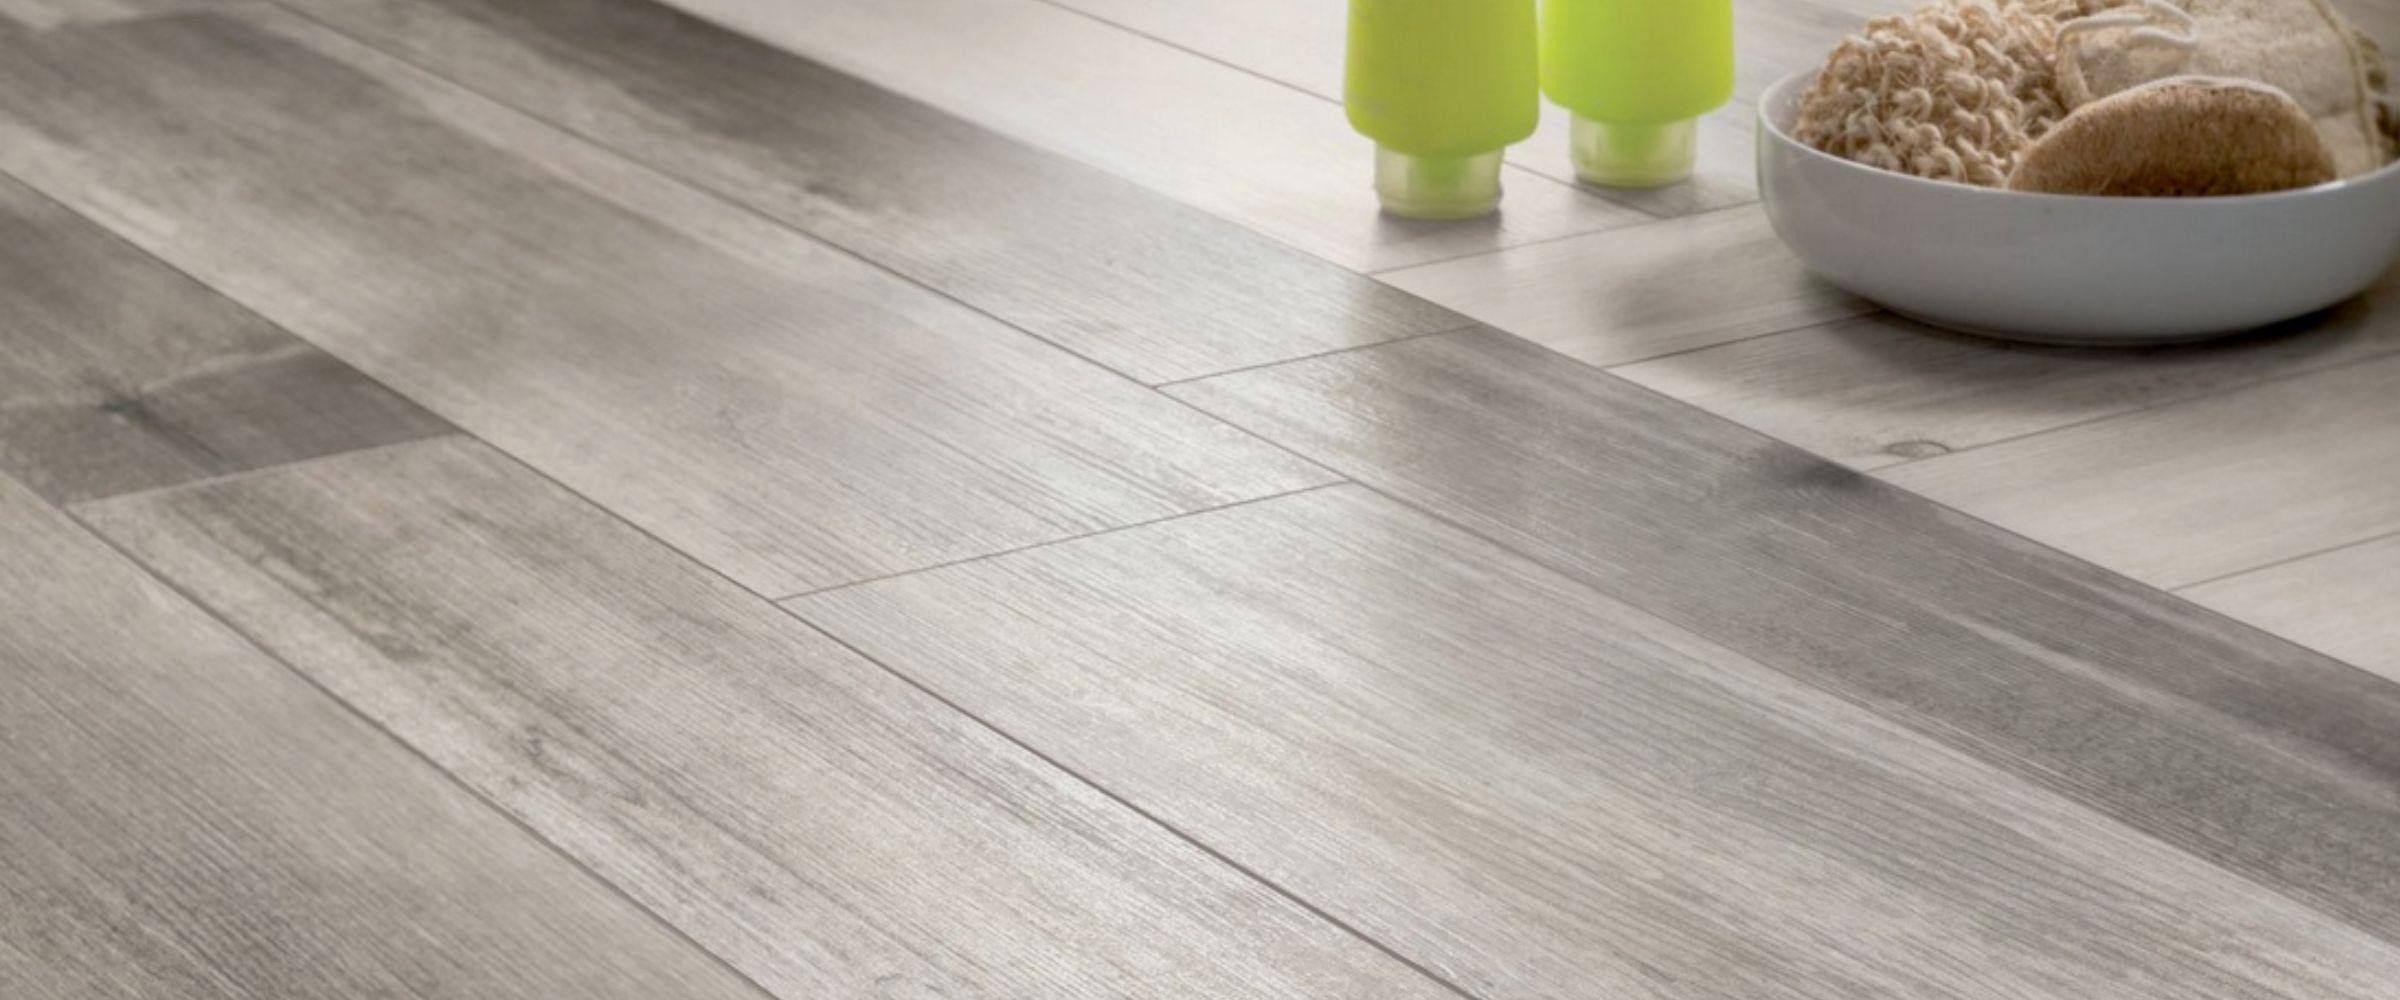 Tile That Looks Like Wood Visualhunt, What Is The Best Wood Look Porcelain Tile